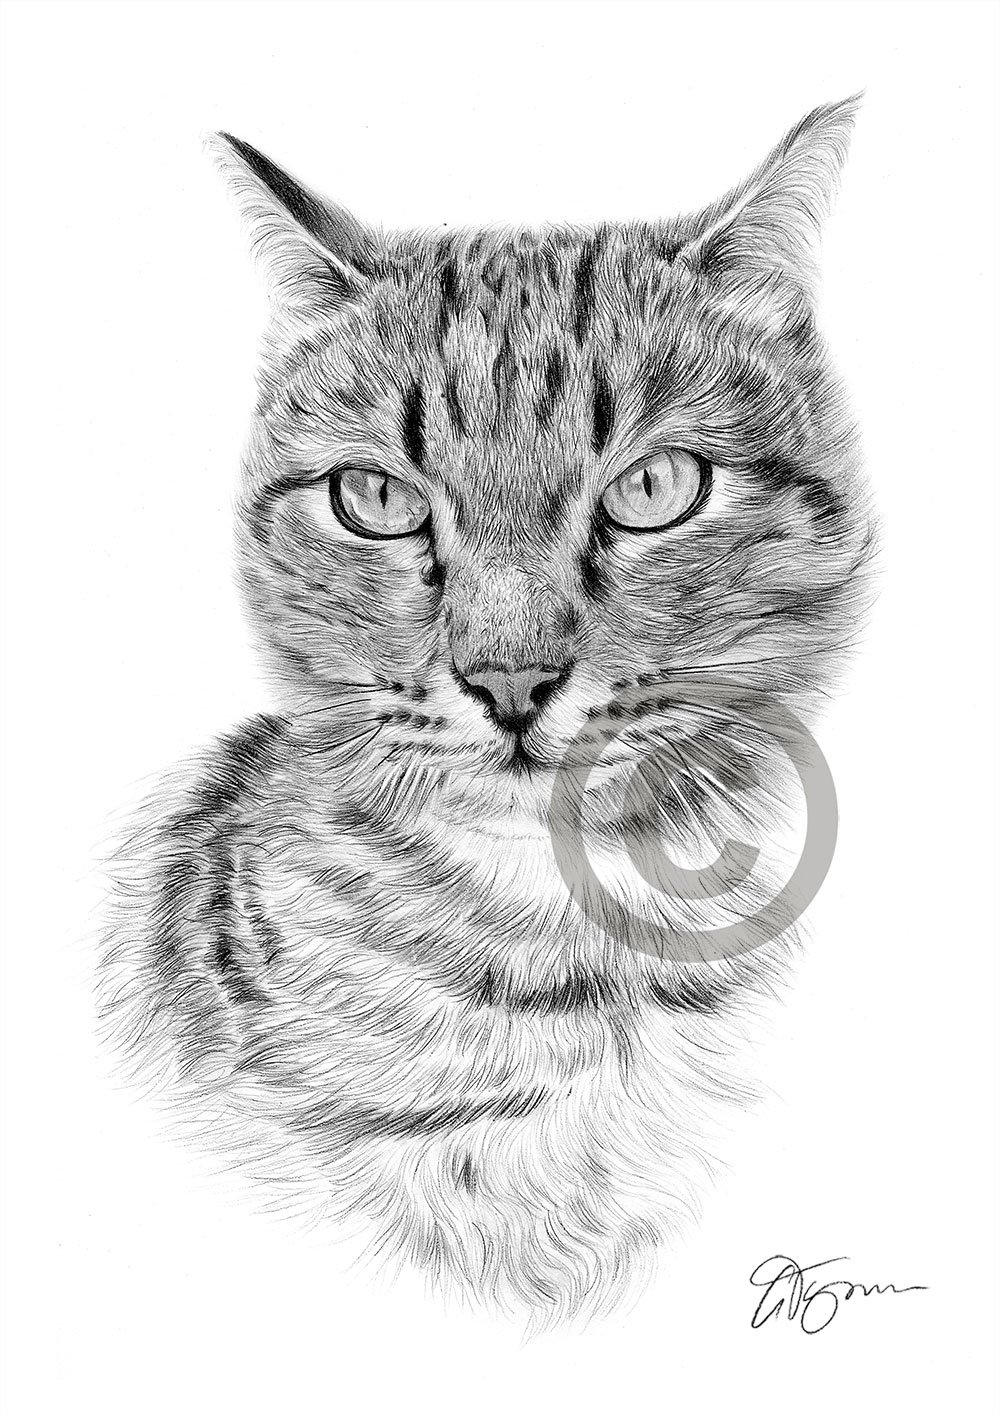 Pencil drawing of a tabby cat by UK artist Gary Tymon